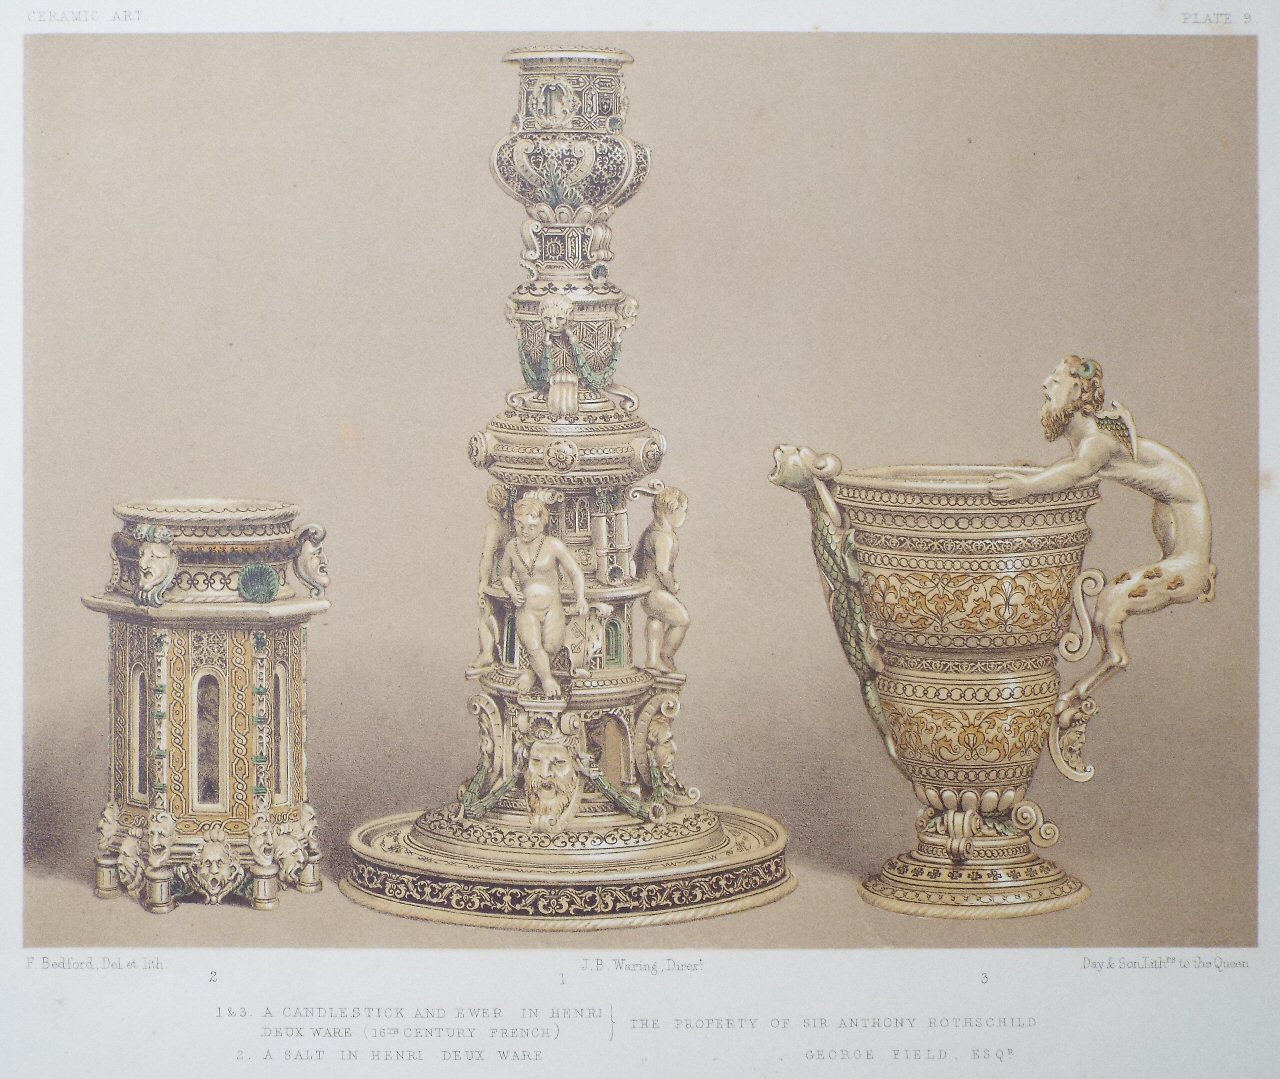 Chromo-lithograph - 1 & 3. A Candlestick and Ewer... - Bedford